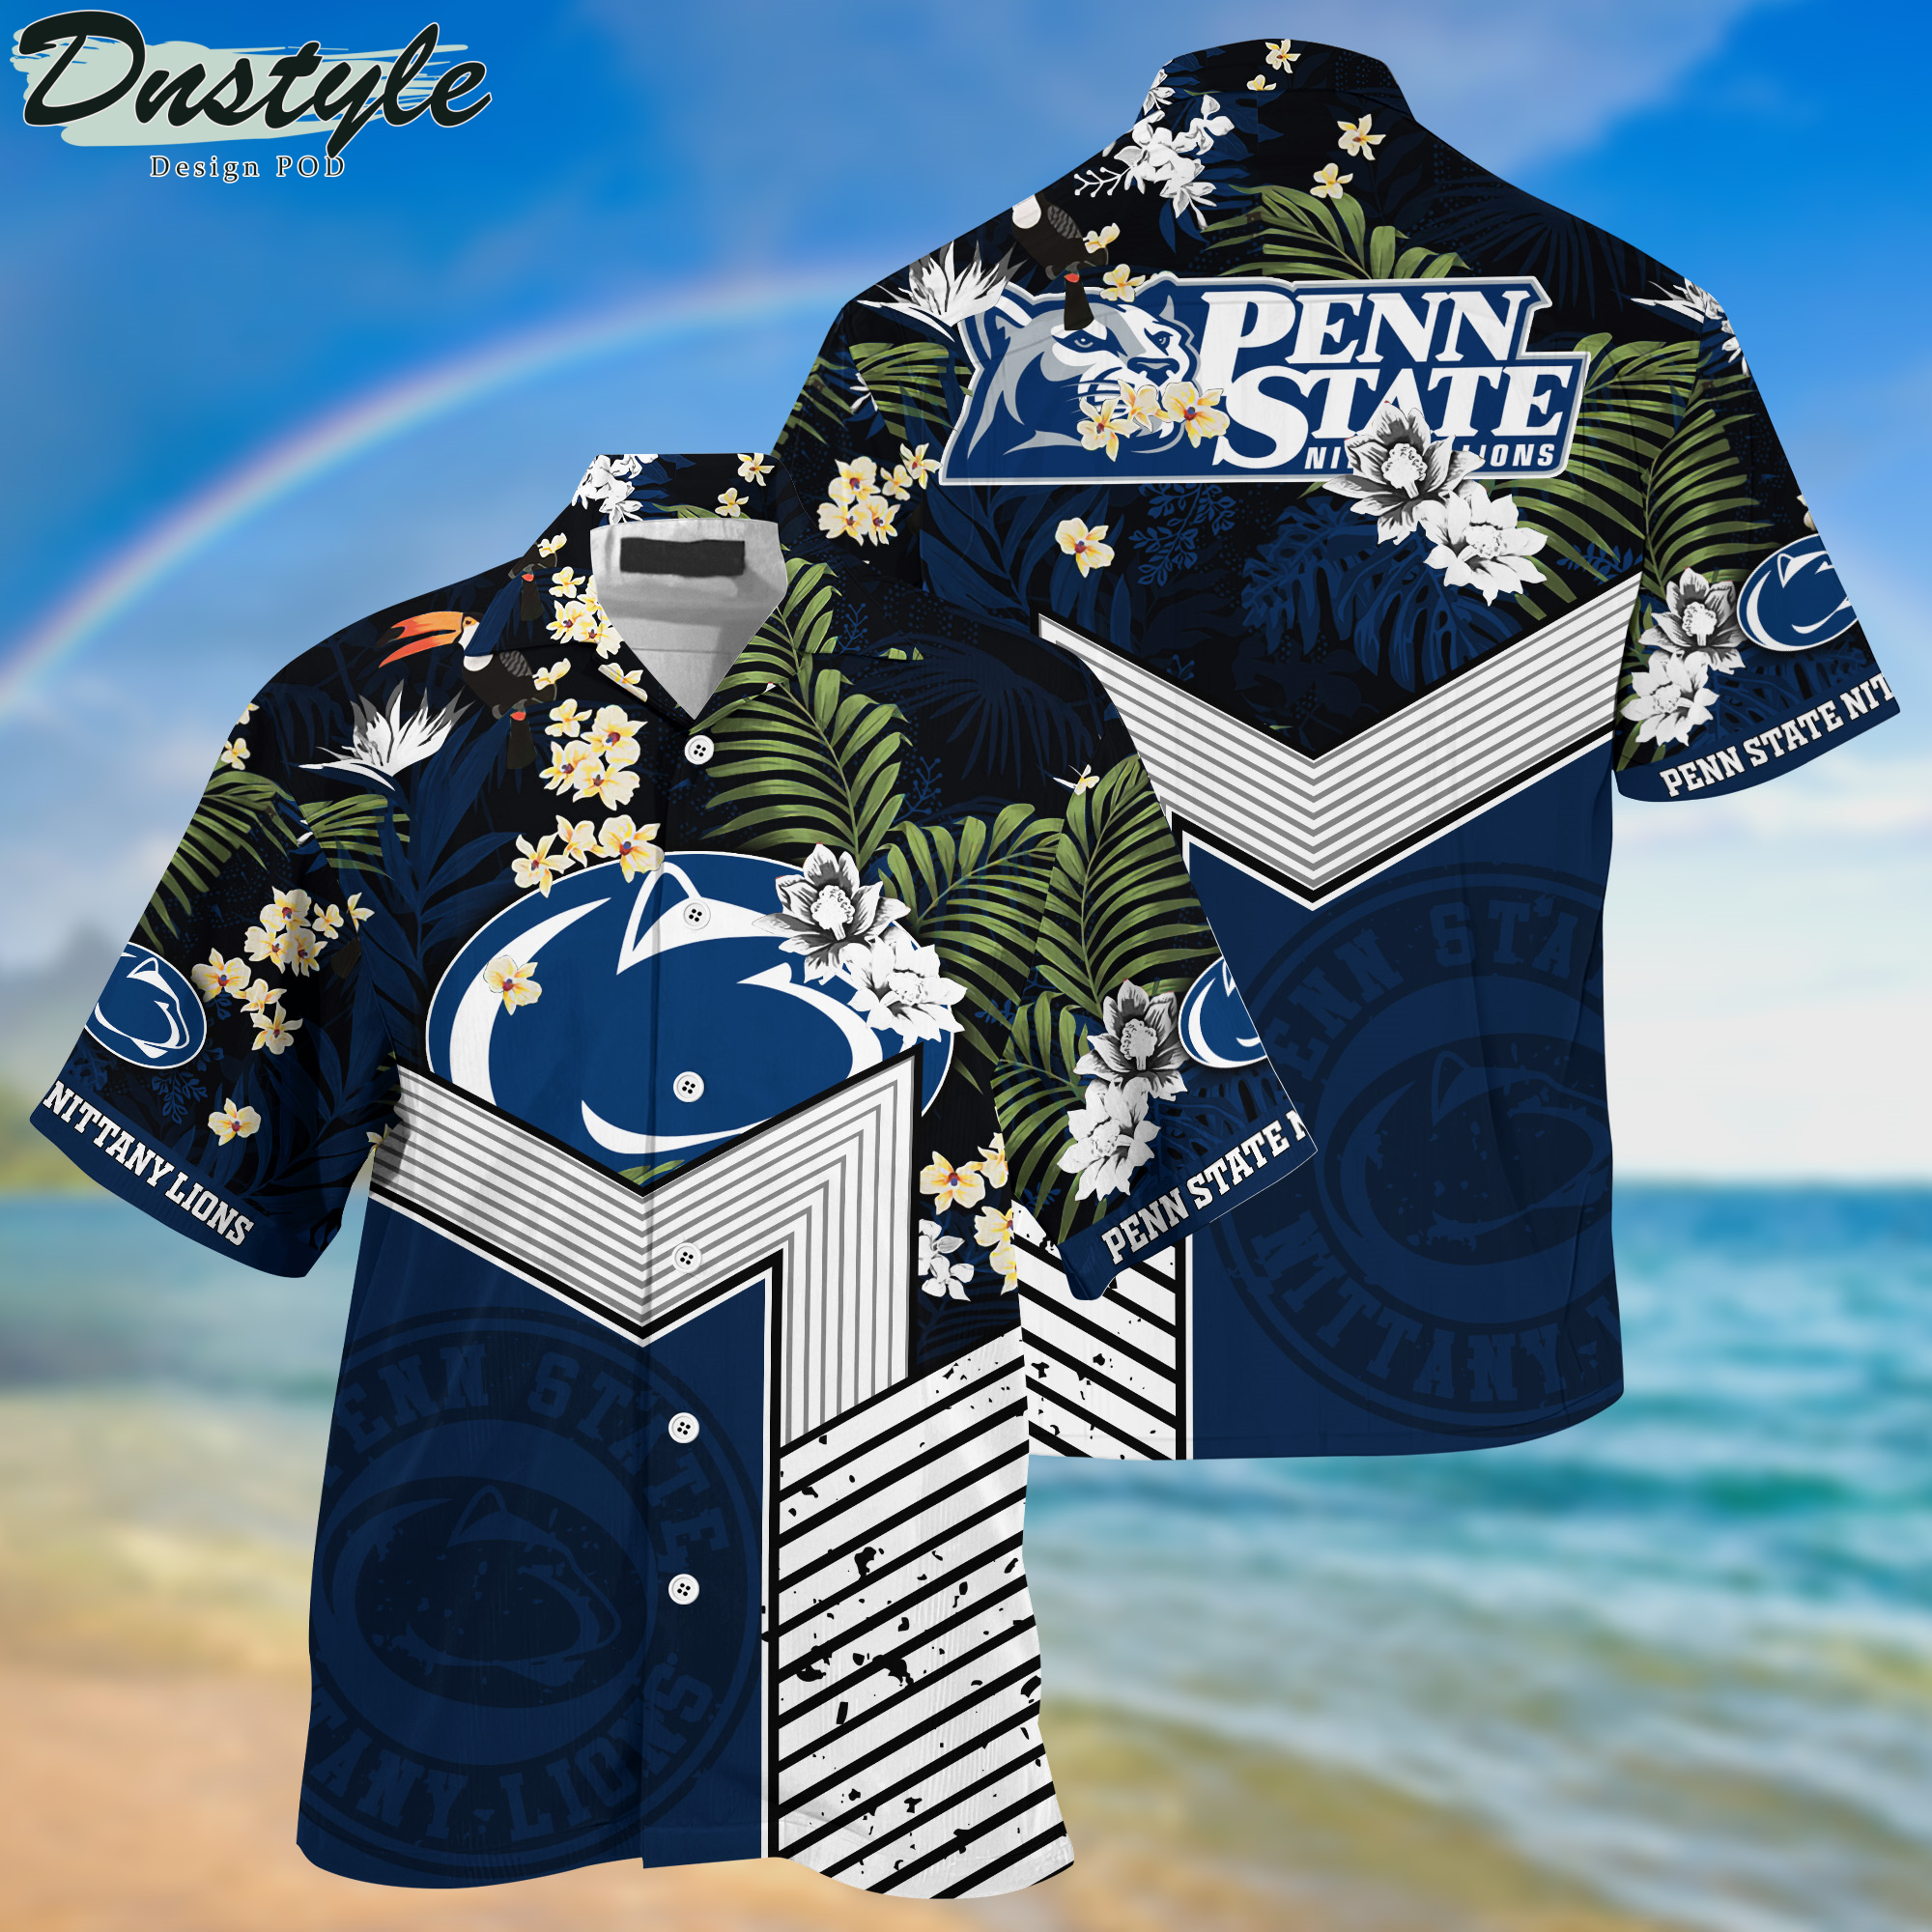 Penn State Nittany Lions Hawaii Shirt And Shorts New Collection